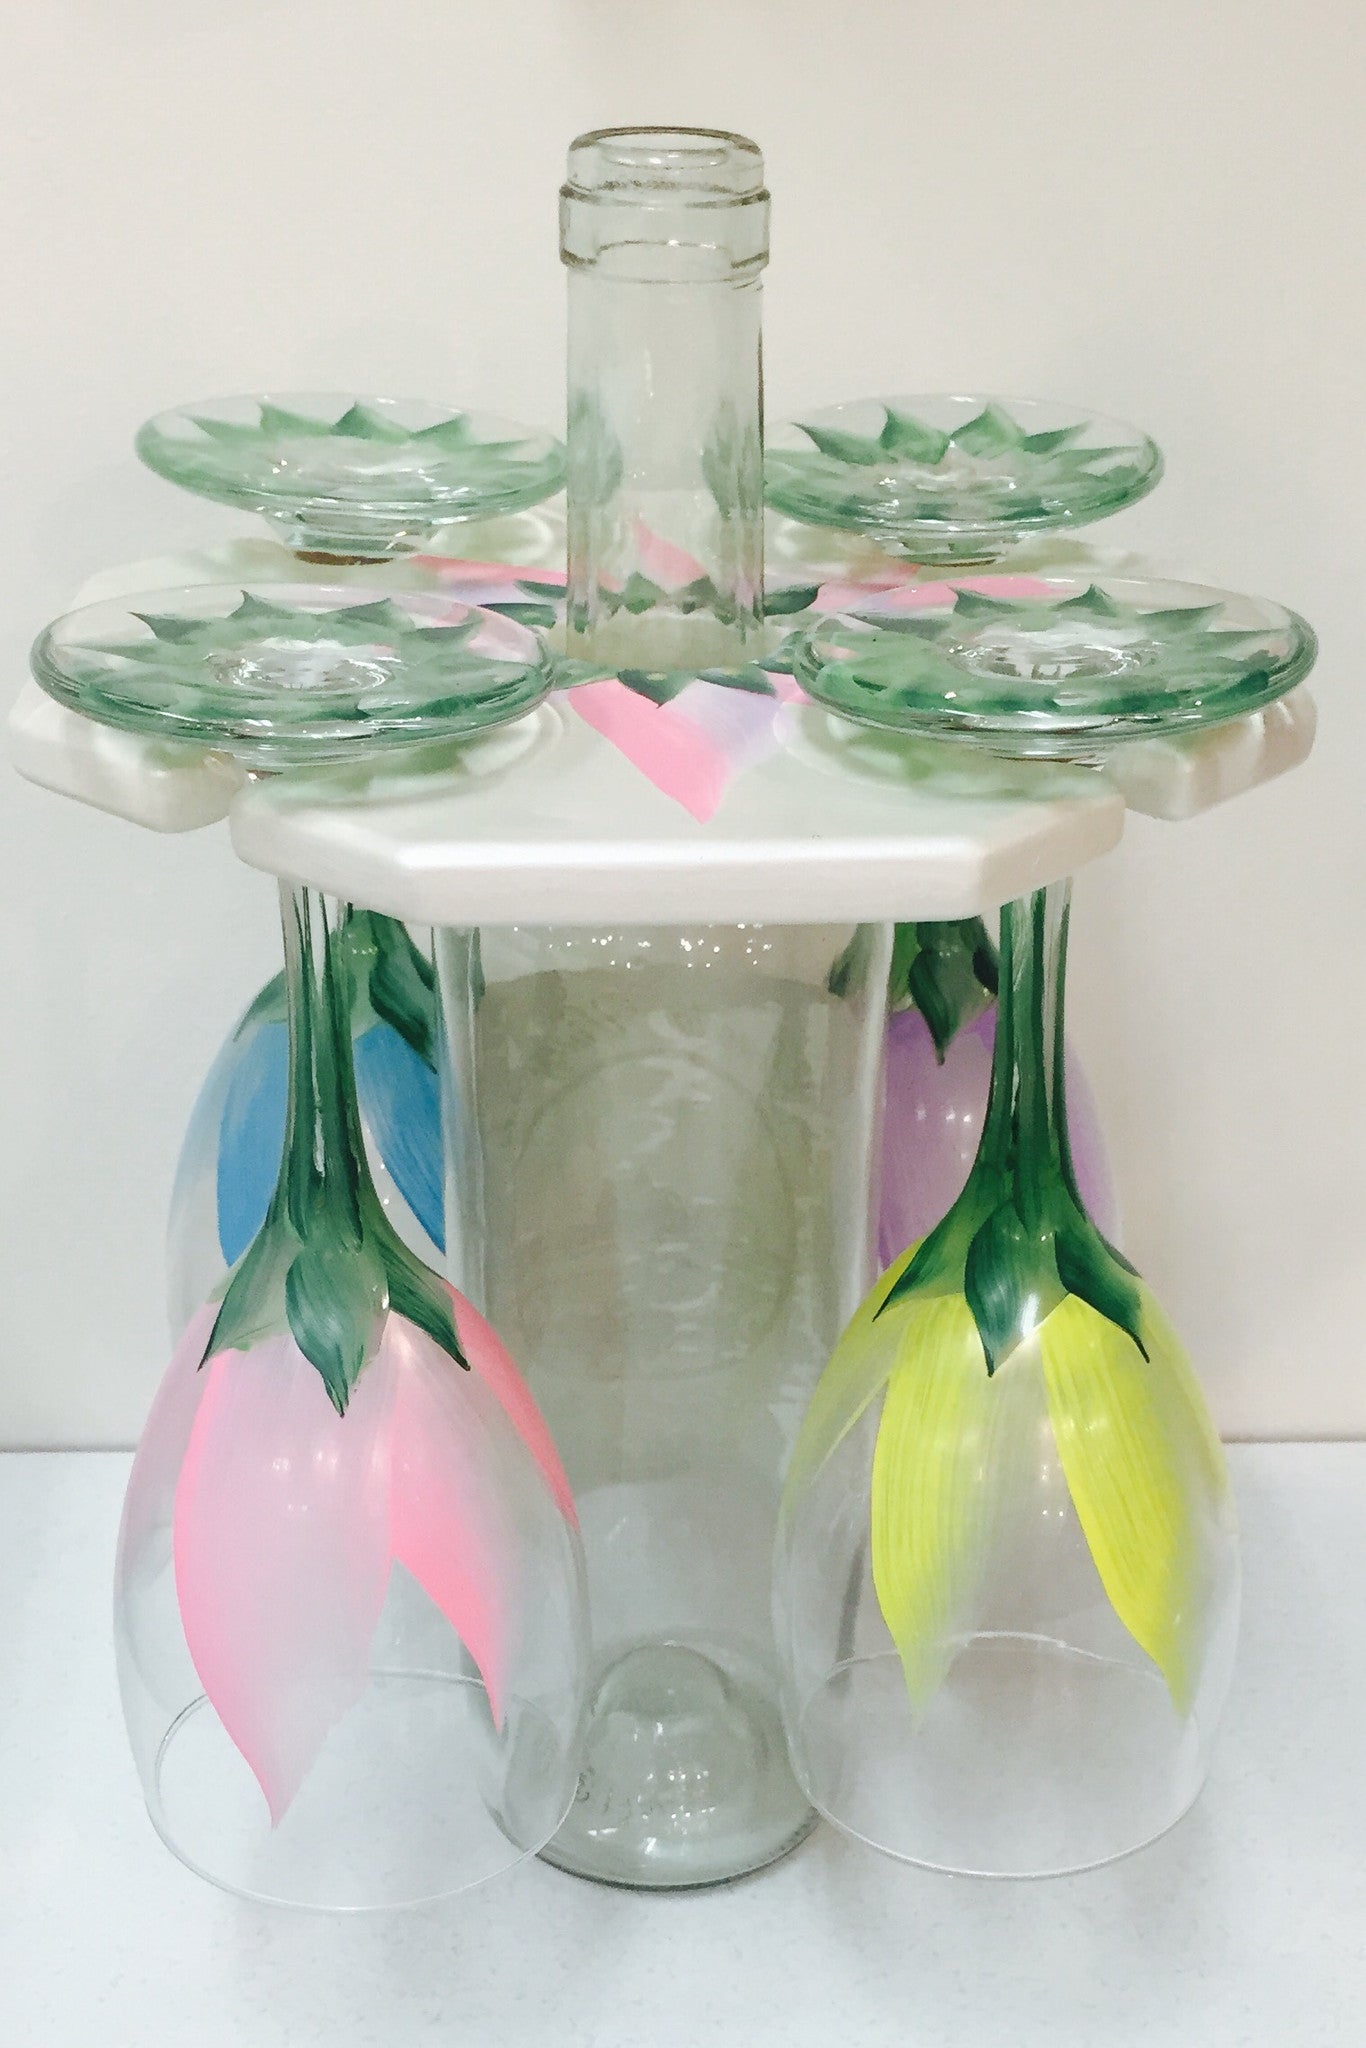 Caddy Set w/ 4 Wine Glasses-Lilies Assorted Colors